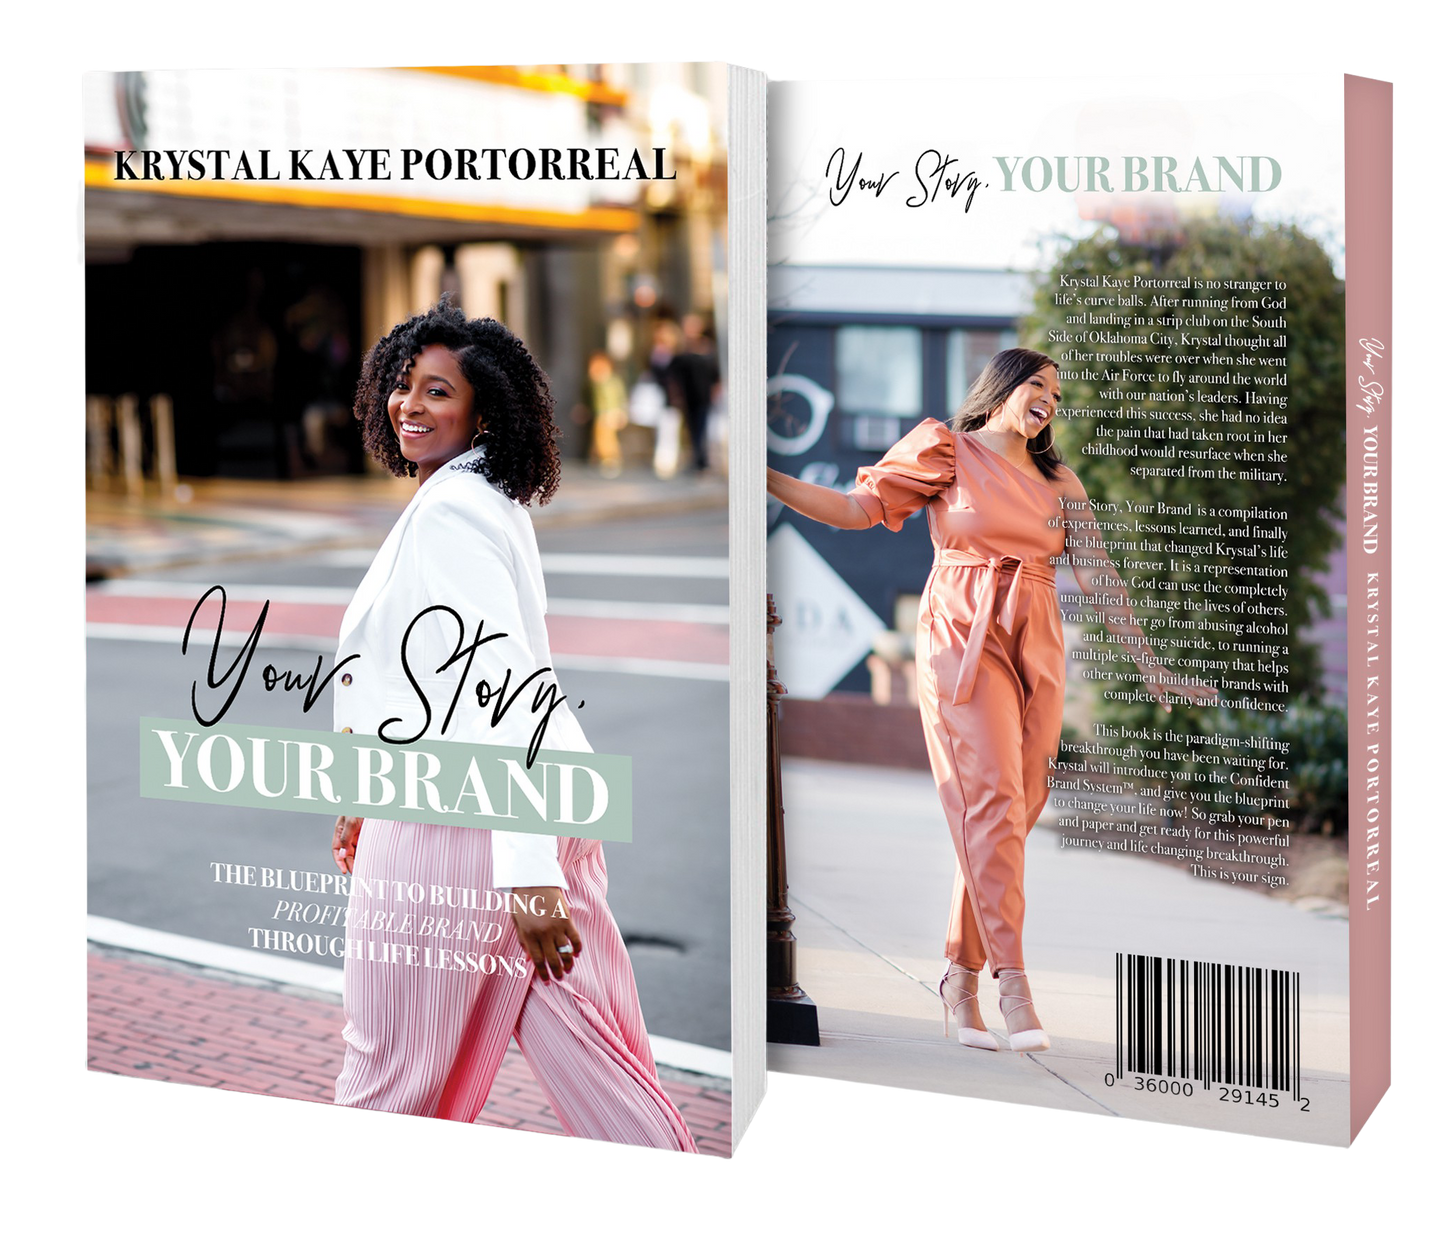 Your Story, Your Brand Testimonial Book